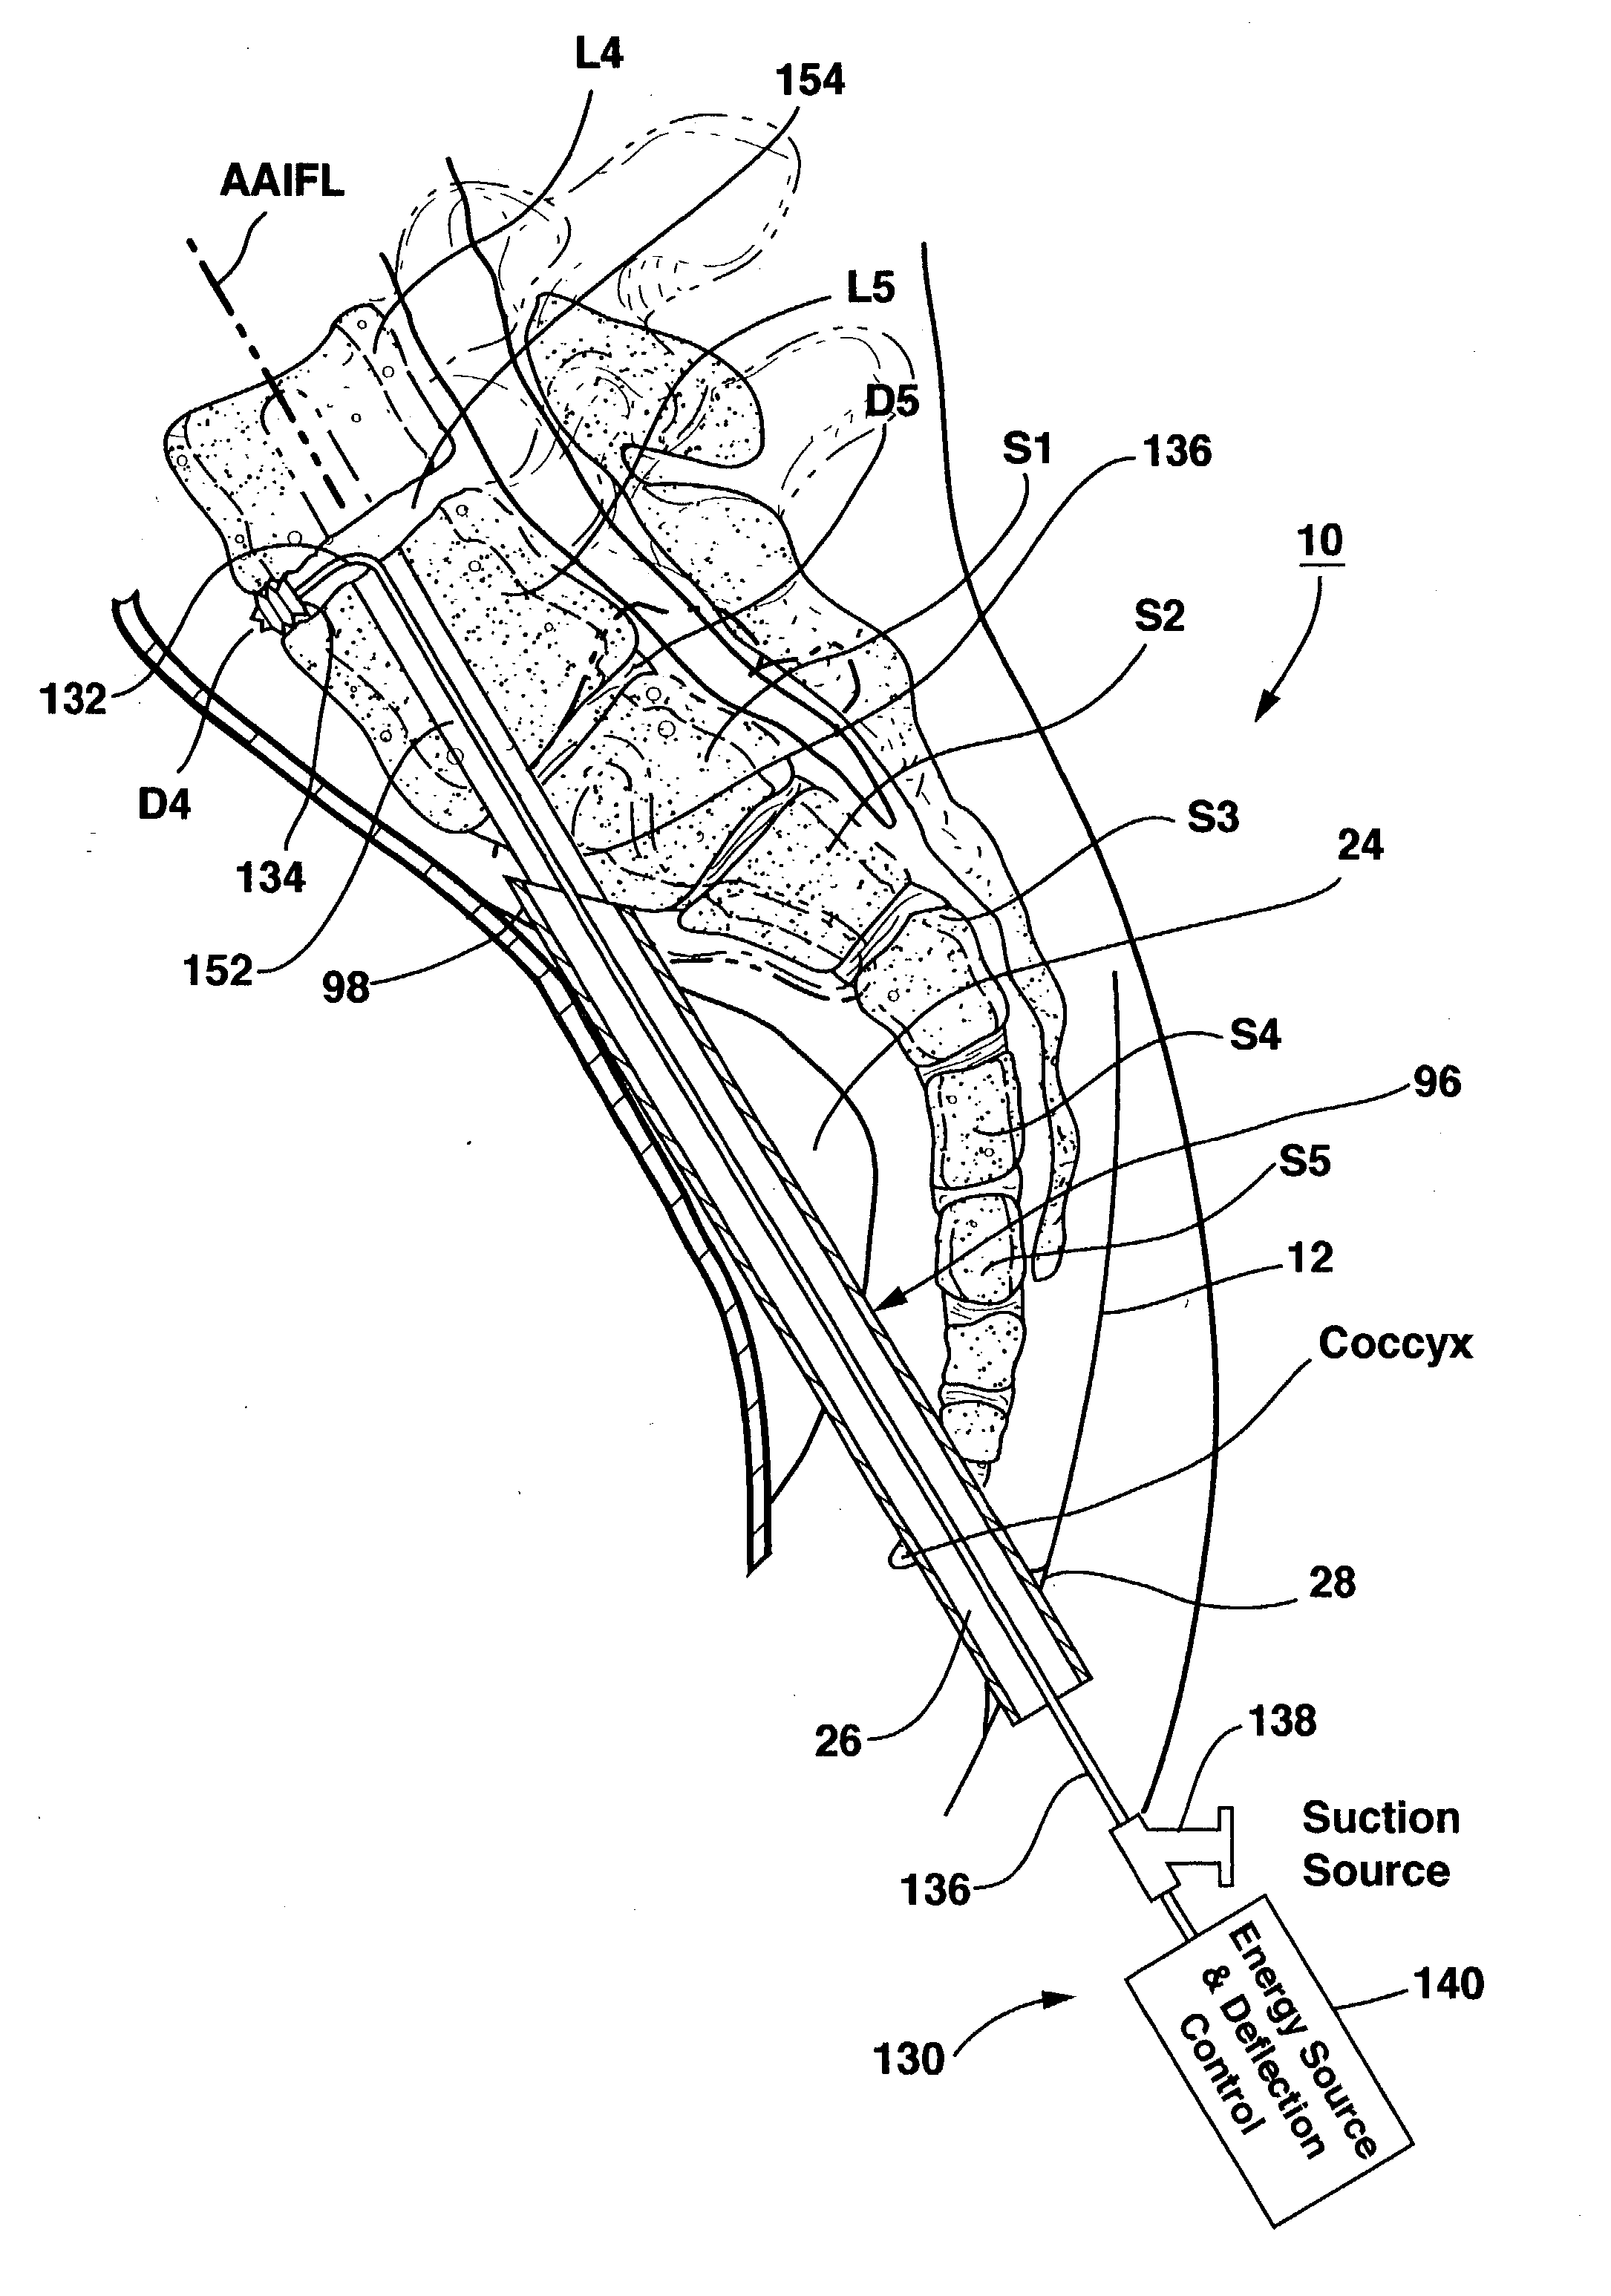 Methods and apparatus for performing therapeutic procedures in the spine